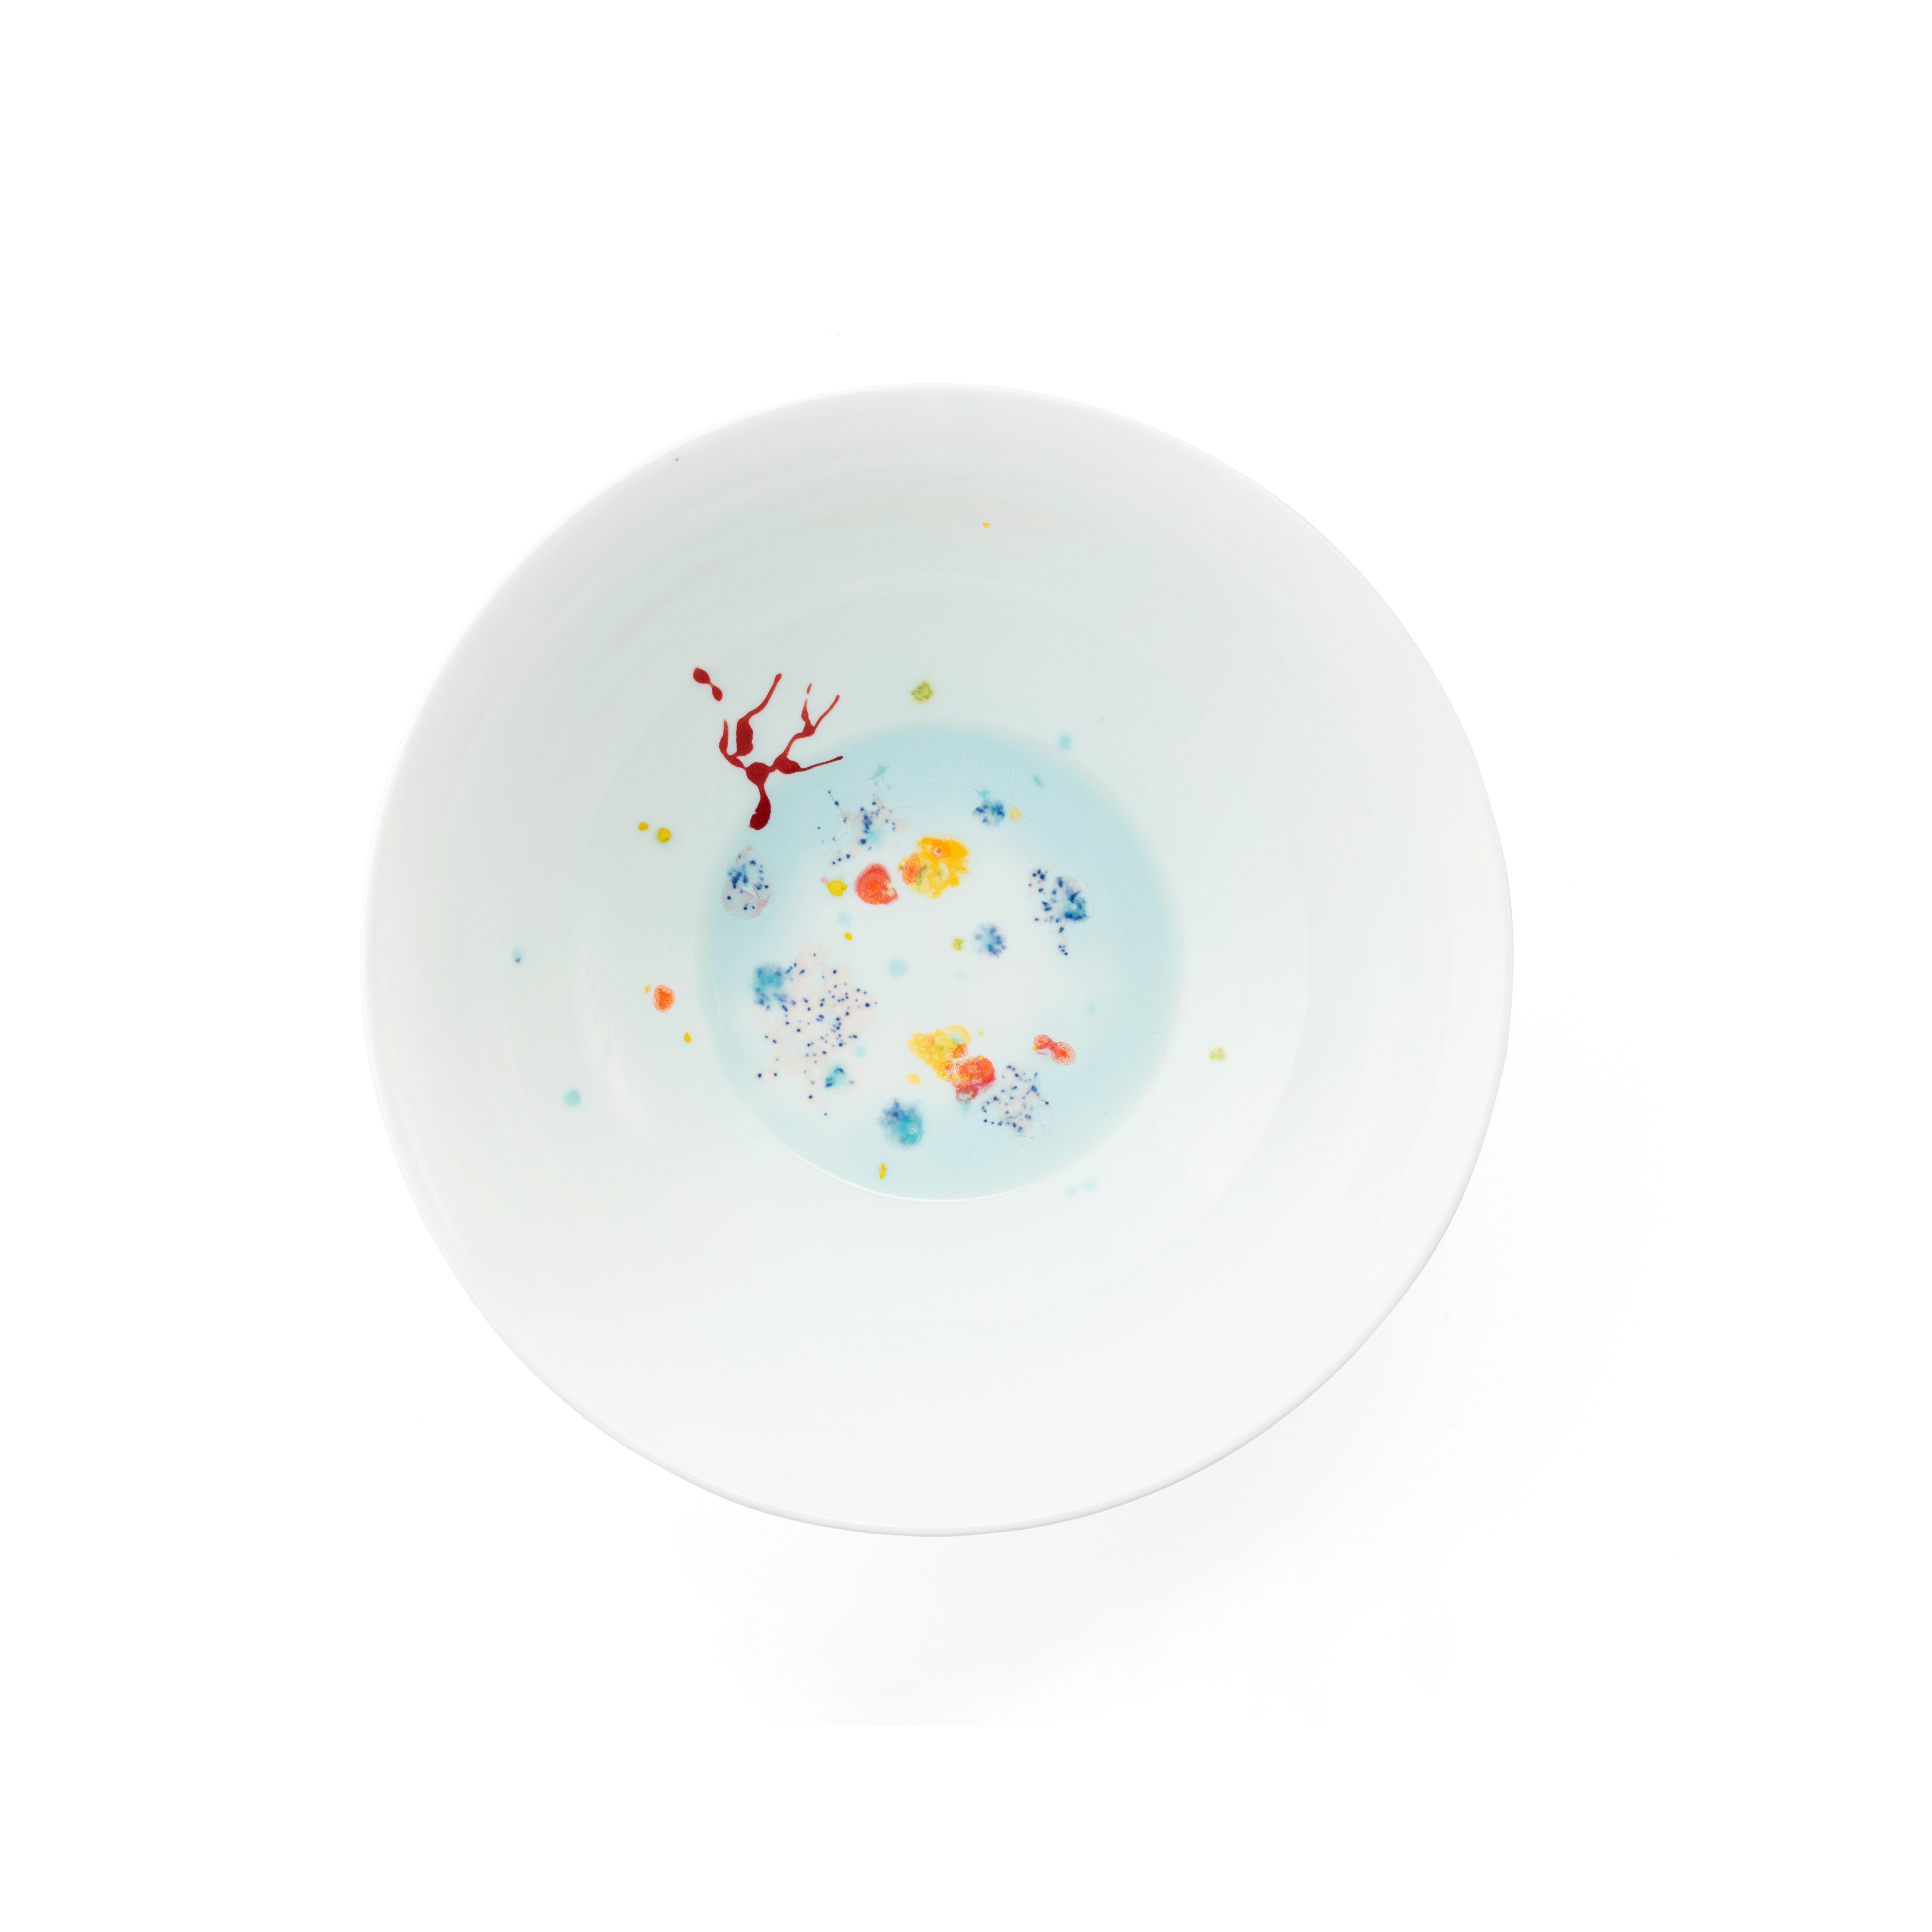 Handcrafted in Italy from the finest porcelain, these blue seabed soup coupe plates have corals lying on a bright bottom surrounded by mysterious multicolored gems floating amid brushes of light pink sand sprinkled with black dots.

Set of 2 blue